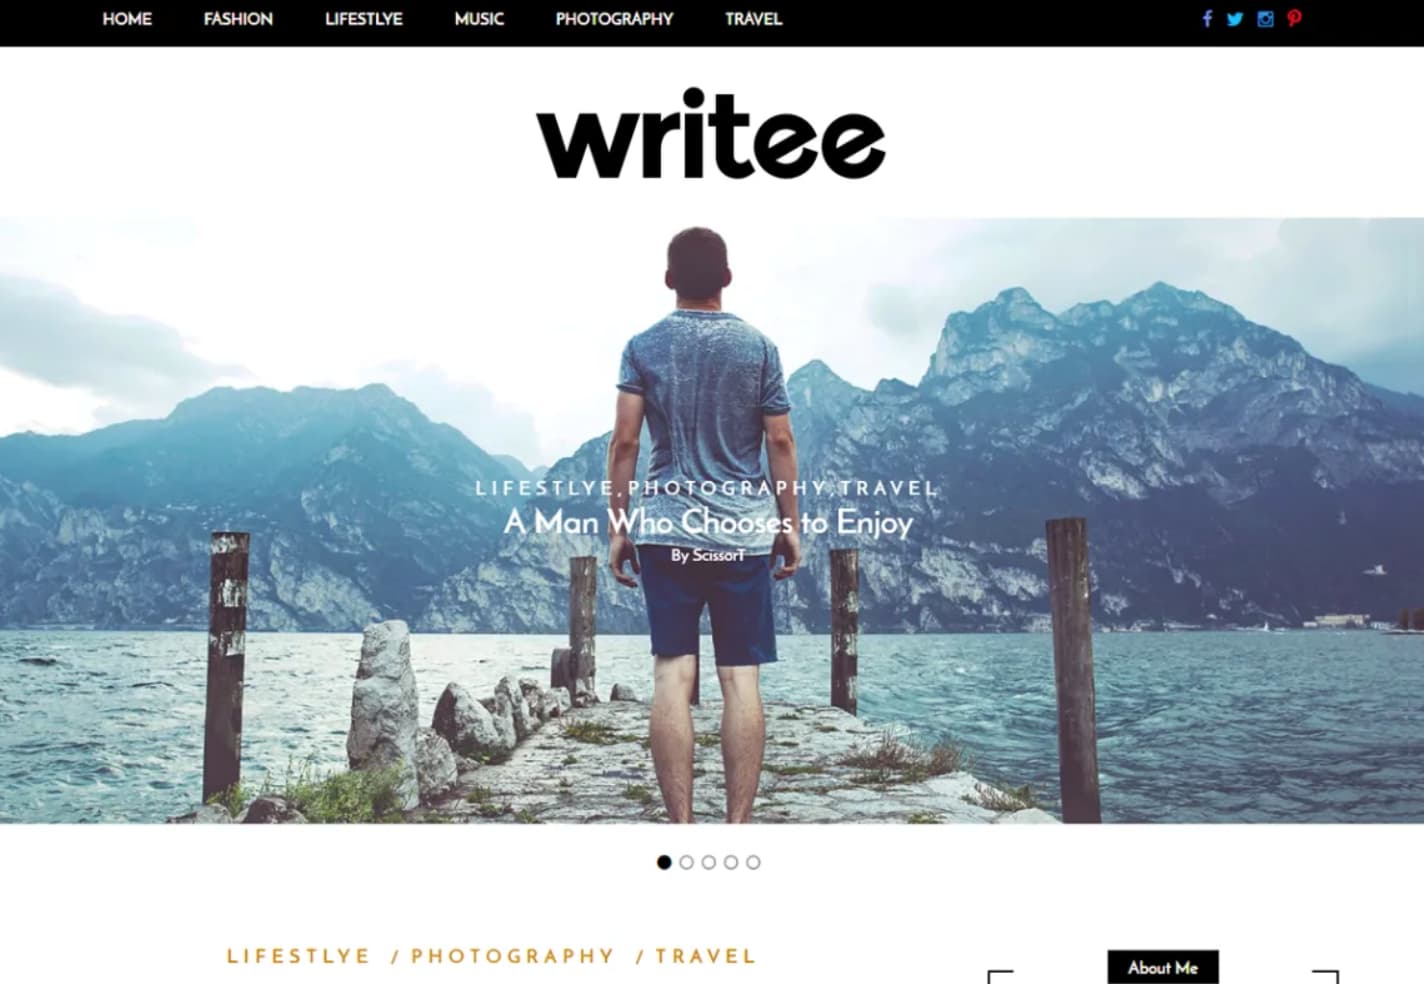 product page for the modern wordpress theme Writee